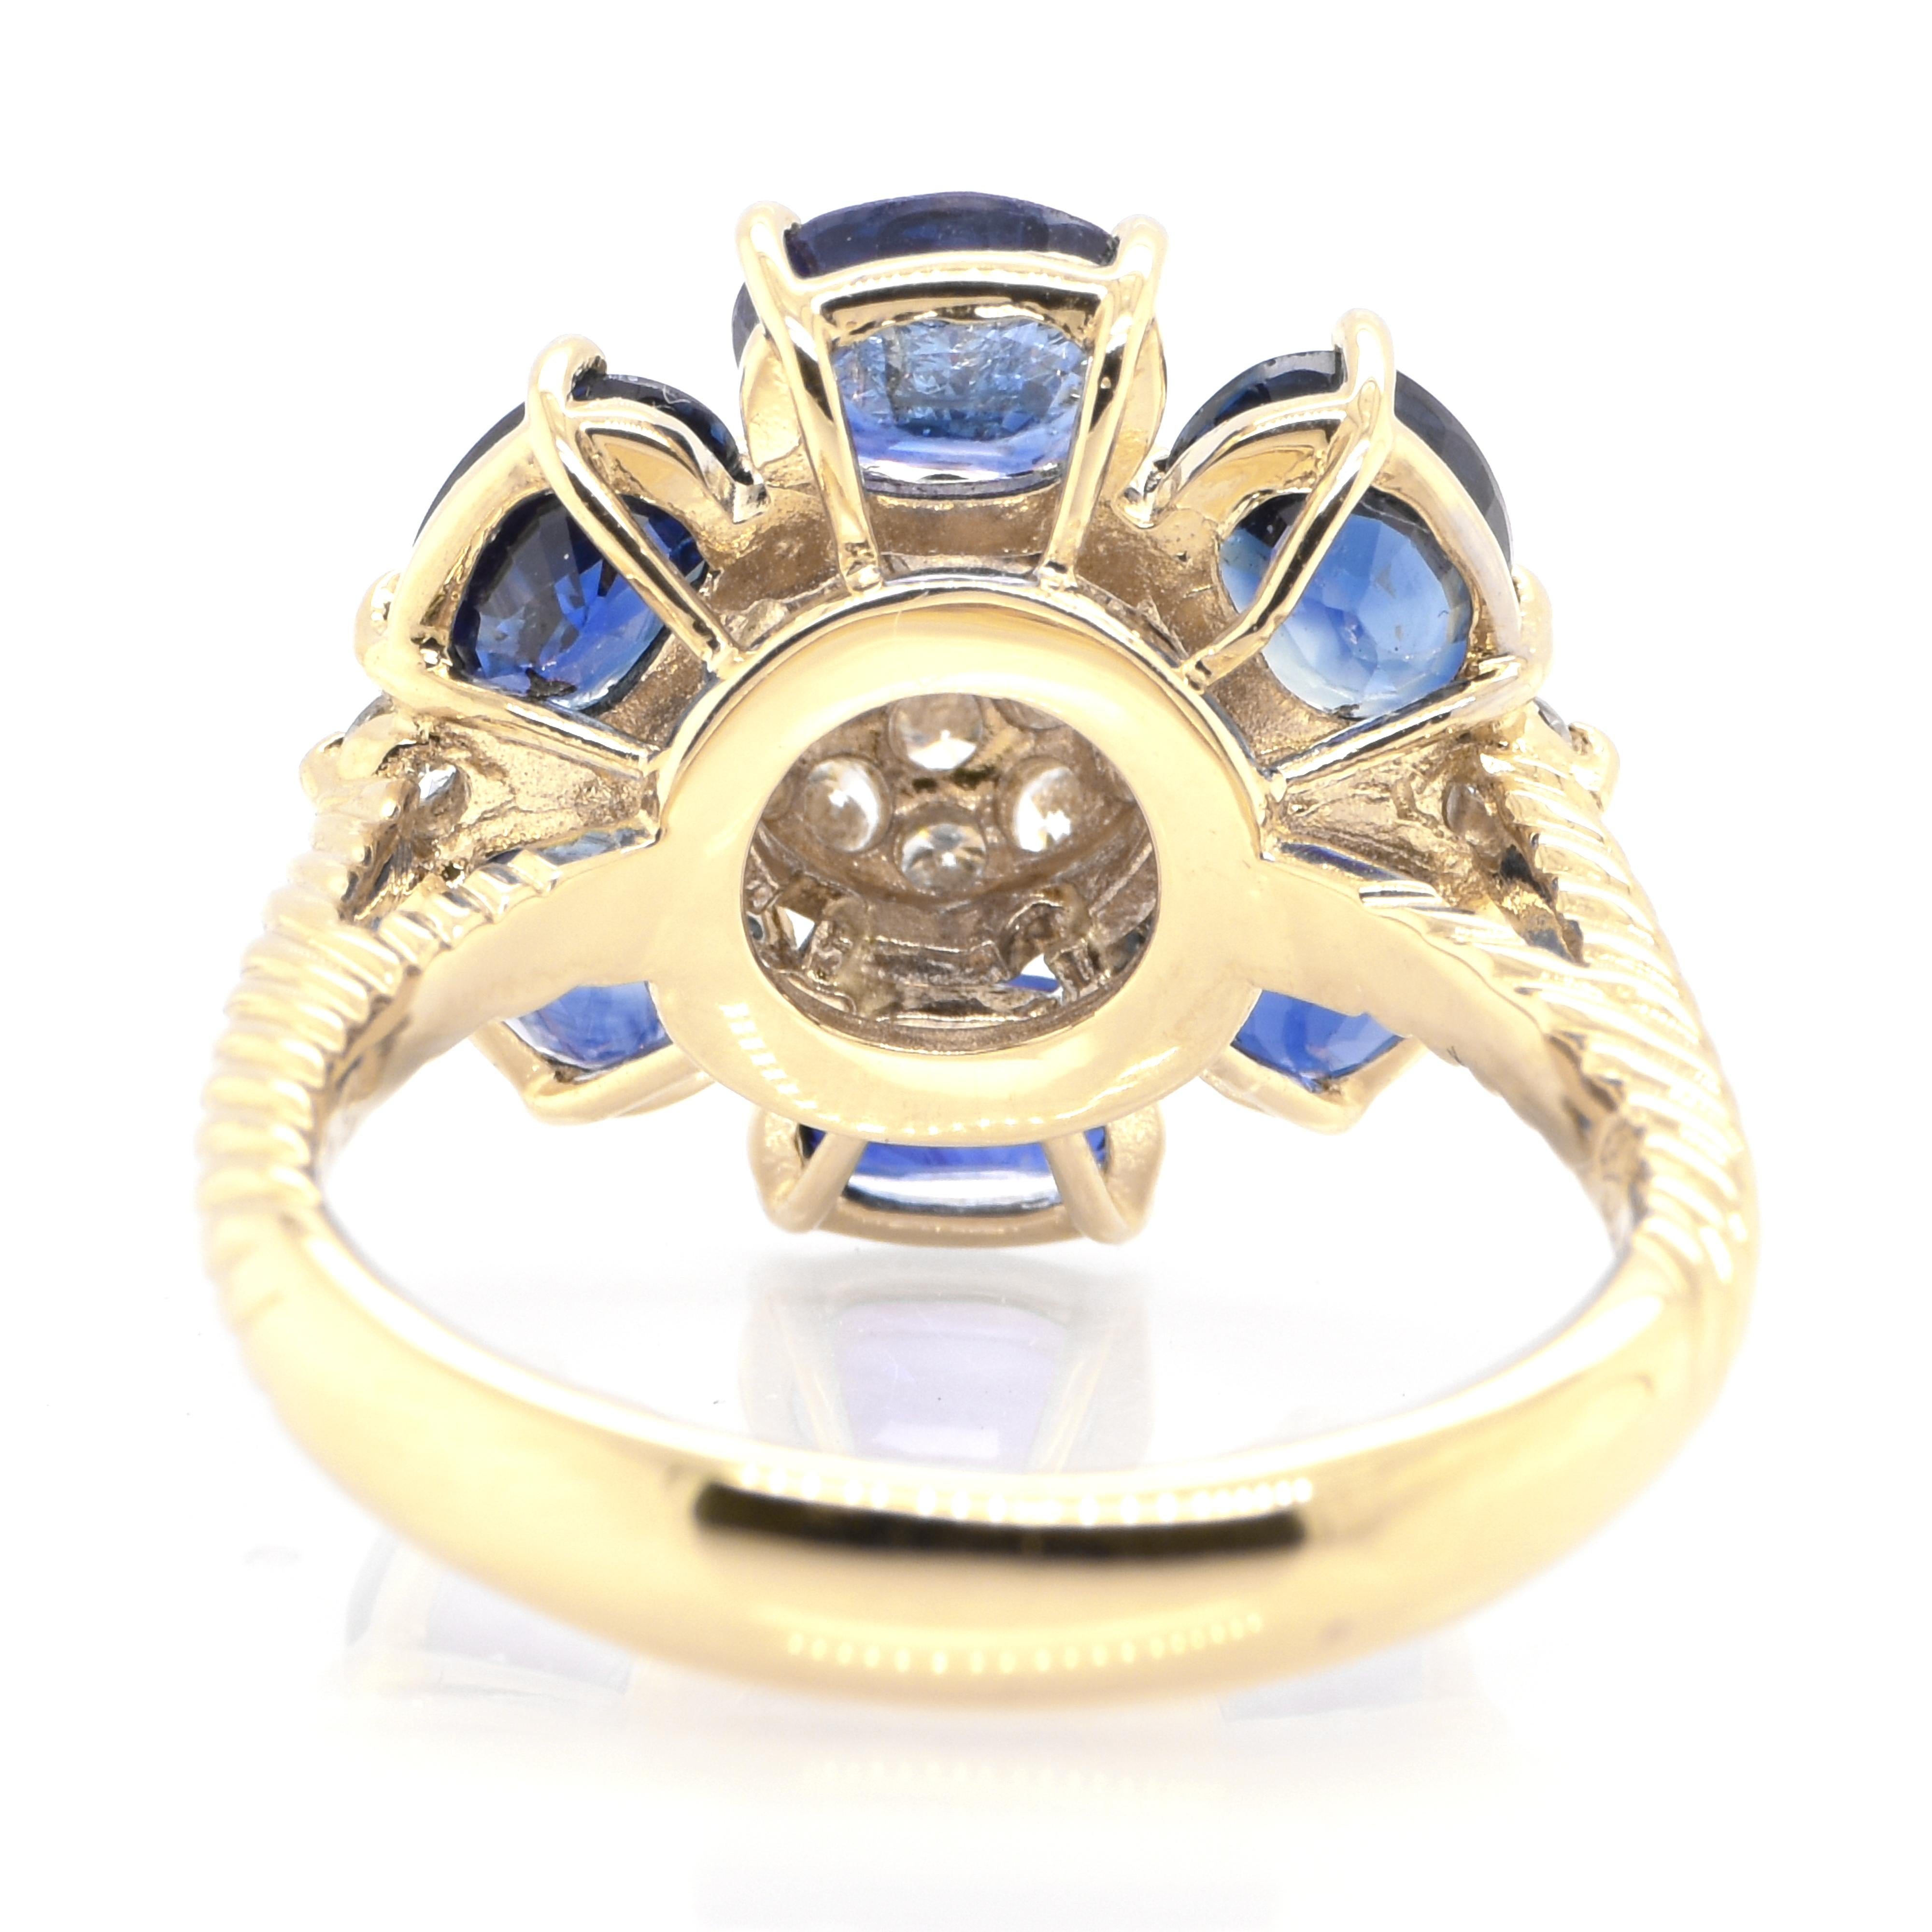 Women's 3.46 Carat Natural Sapphire and Diamond Cluster Ring Set in 18K Yellow Gold For Sale